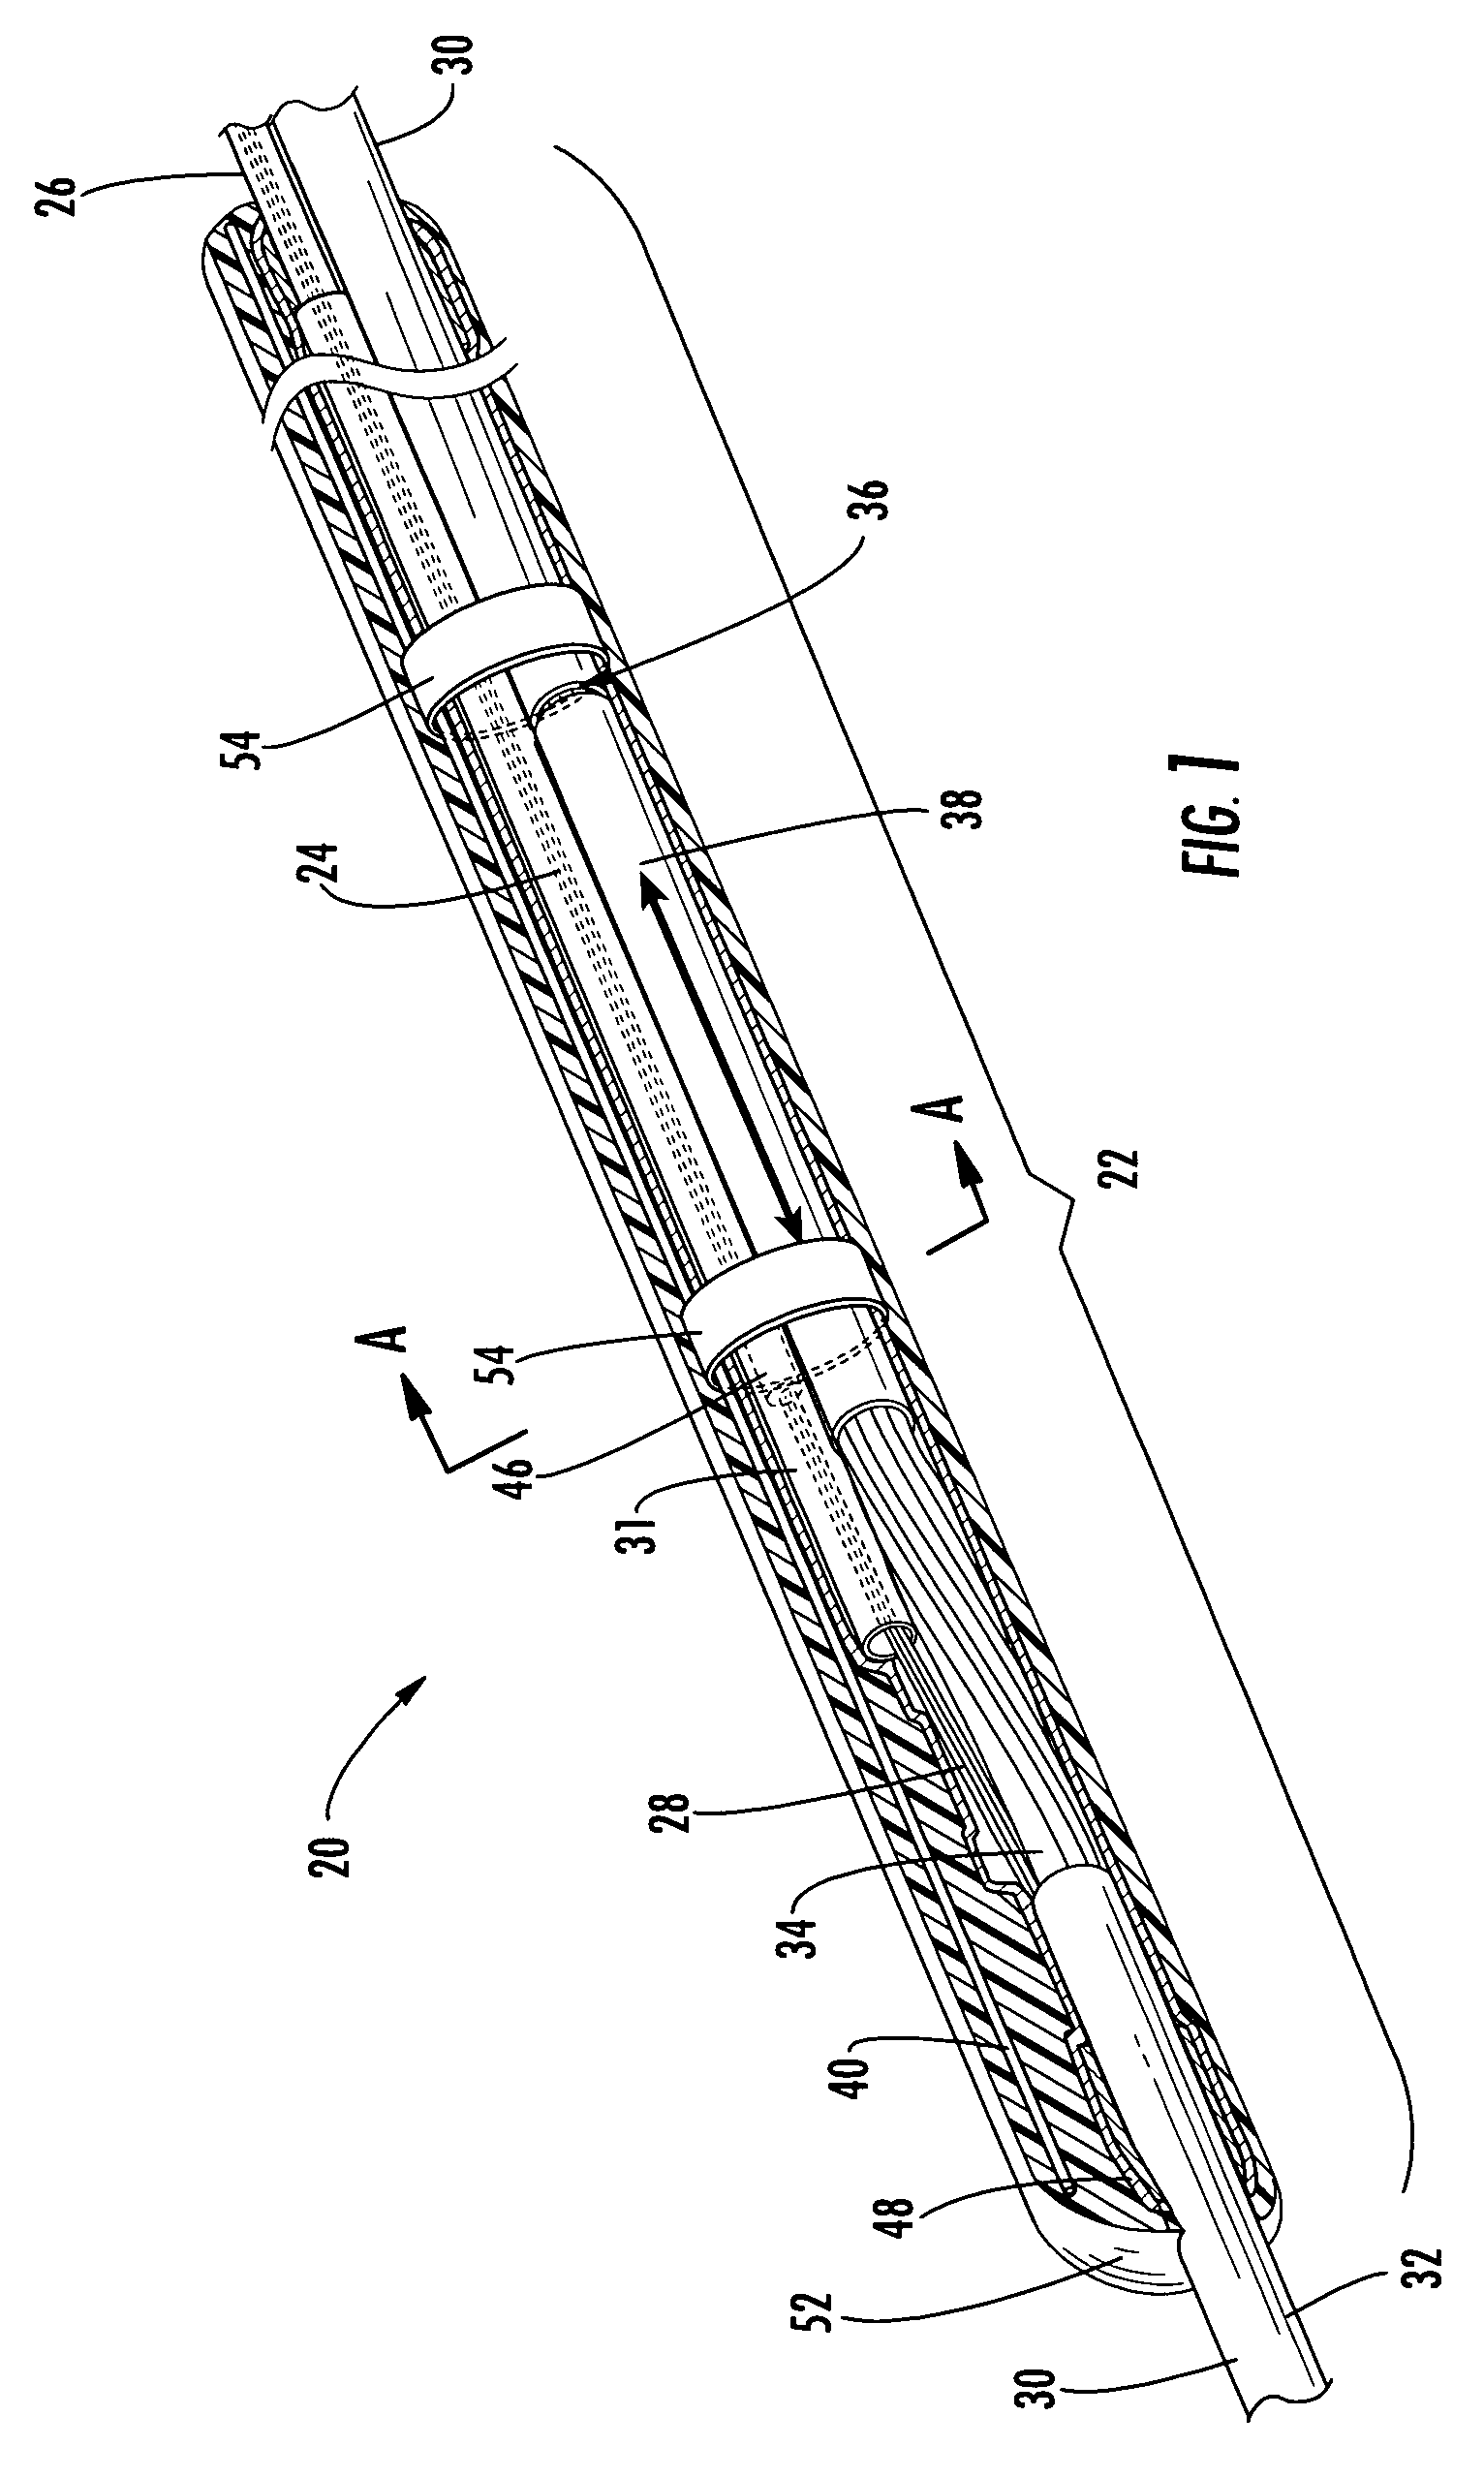 Distribution cable having overmolded mid-span access location with preferential bending